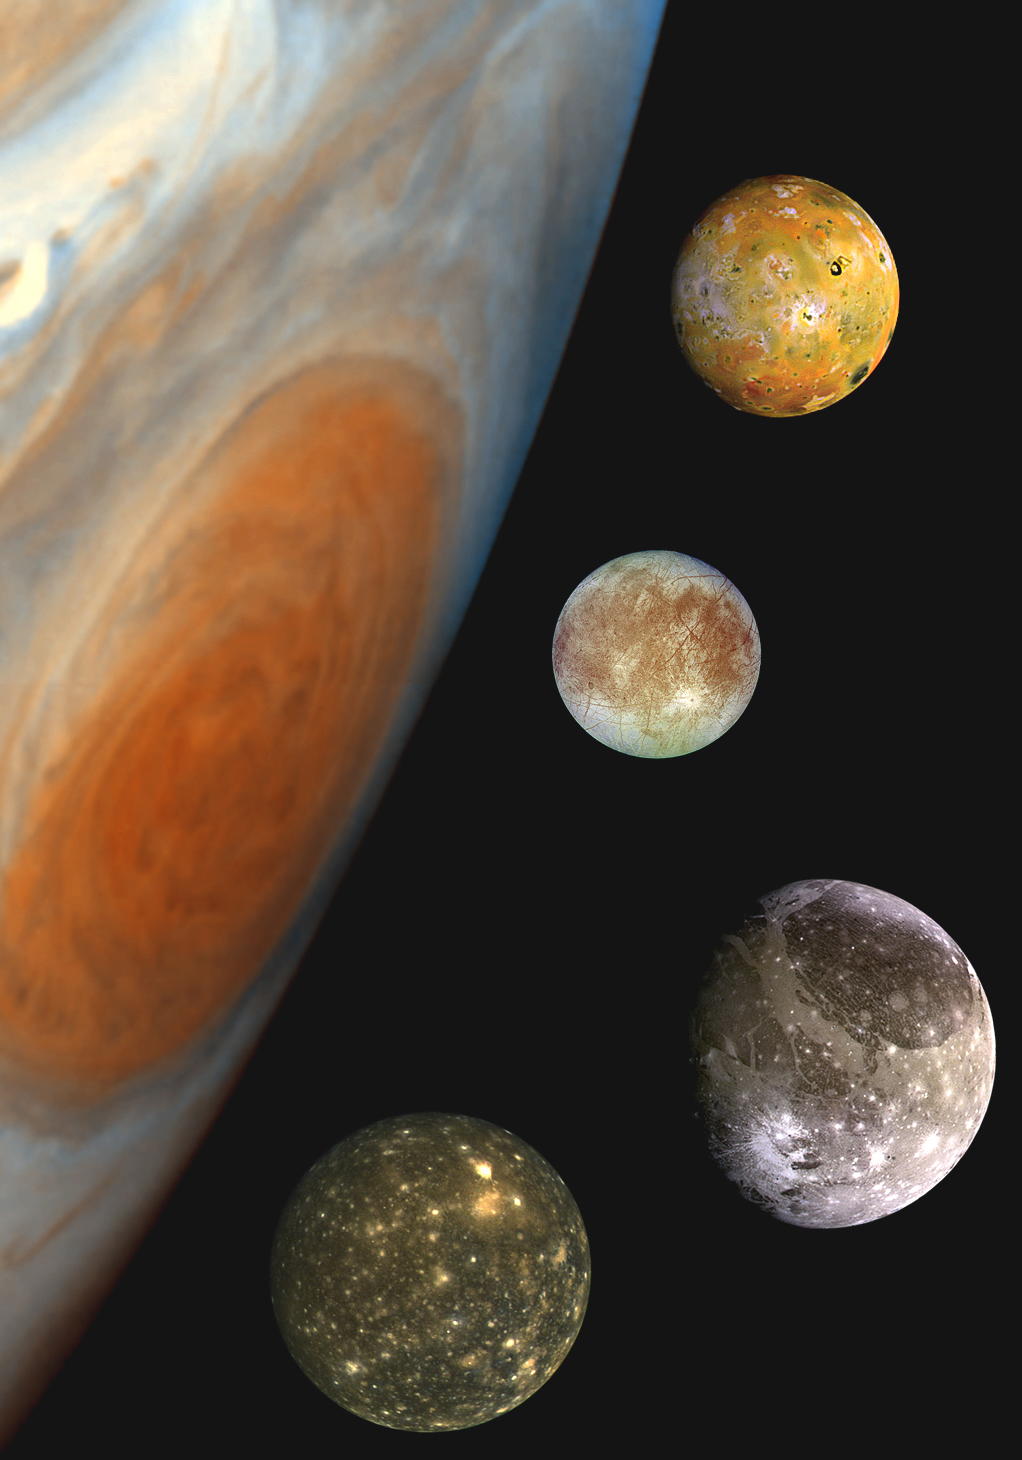 composite image of jupiter at left with moons on the right